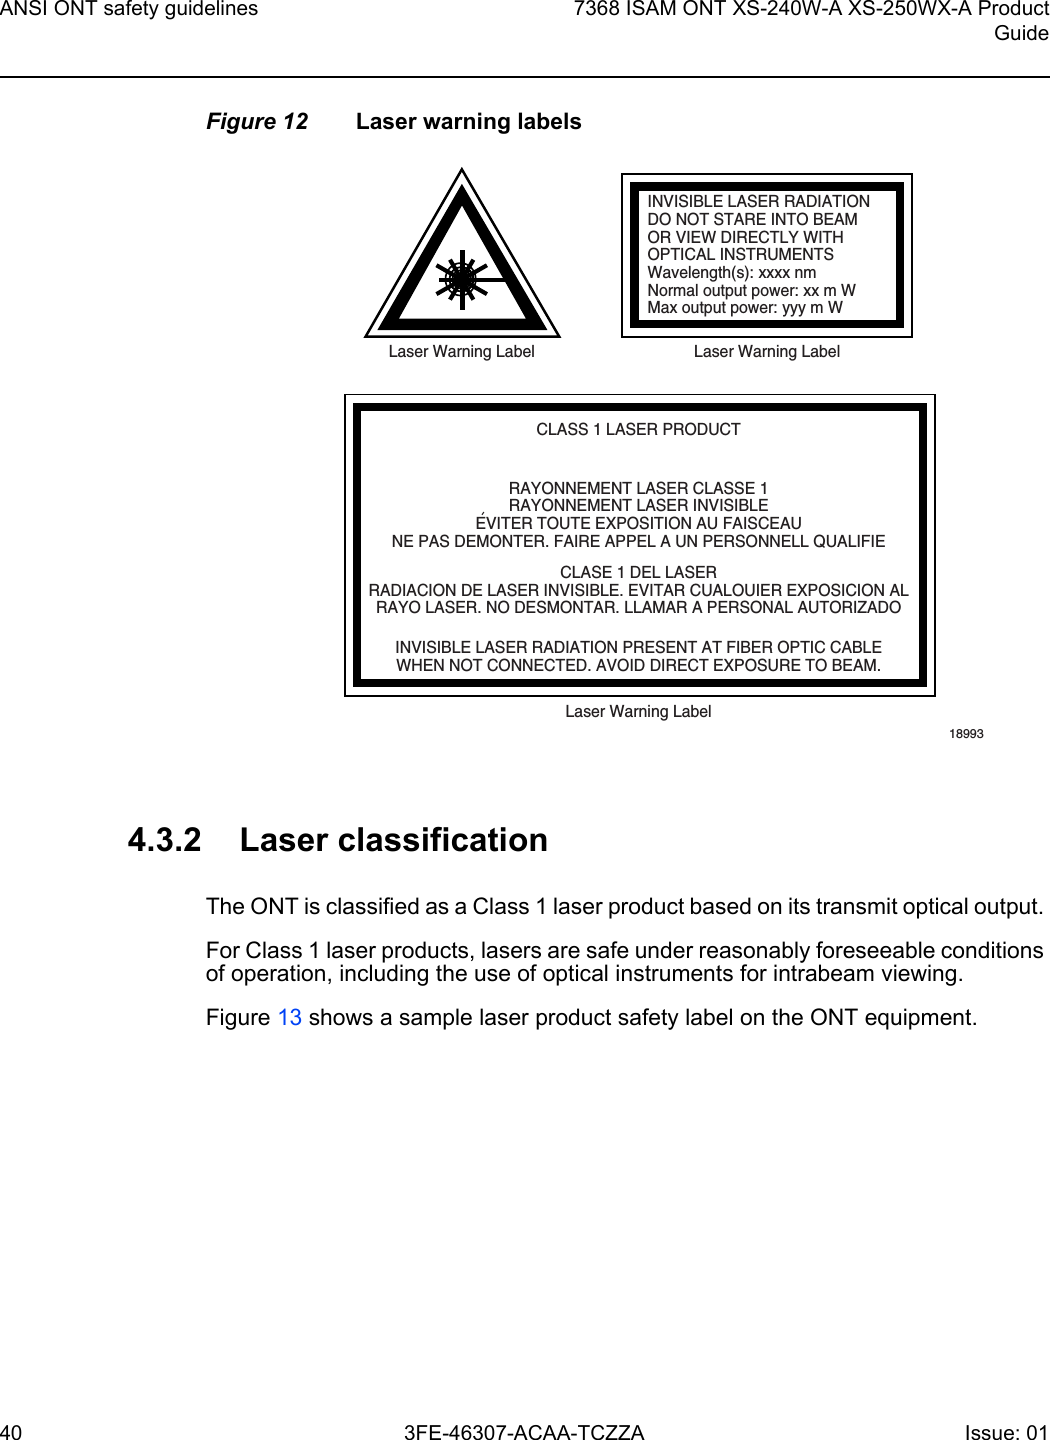 ANSI ONT safety guidelines407368 ISAM ONT XS-240W-A XS-250WX-A ProductGuide3FE-46307-ACAA-TCZZA Issue: 01 Figure 12 Laser warning labels4.3.2 Laser classificationThe ONT is classified as a Class 1 laser product based on its transmit optical output. For Class 1 laser products, lasers are safe under reasonably foreseeable conditions of operation, including the use of optical instruments for intrabeam viewing.Figure 13 shows a sample laser product safety label on the ONT equipment.INVISIBLE LASER RADIATIONDO NOT STARE INTO BEAMOR VIEW DIRECTLY WITHOPTICAL INSTRUMENTSWavelength(s): xxxx nmNormal output power: xx m WMax output power: yyy m WLaser Warning Label Laser Warning LabelCLASS 1 LASER PRODUCTINVISIBLE LASER RADIATION PRESENT AT FIBER OPTIC CABLEWHEN NOT CONNECTED. AVOID DIRECT EXPOSURE TO BEAM.RAYONNEMENT LASER CLASSE 1RAYONNEMENT LASER INVISIBLEEVITER TOUTE EXPOSITION AU FAISCEAUNE PAS DEMONTER. FAIRE APPEL A UN PERSONNELL QUALIFIECLASE 1 DEL LASERRADIACION DE LASER INVISIBLE. EVITAR CUALOUIER EXPOSICION ALRAYO LASER. NO DESMONTAR. LLAMAR A PERSONAL AUTORIZADOLaser Warning Label18993&apos;